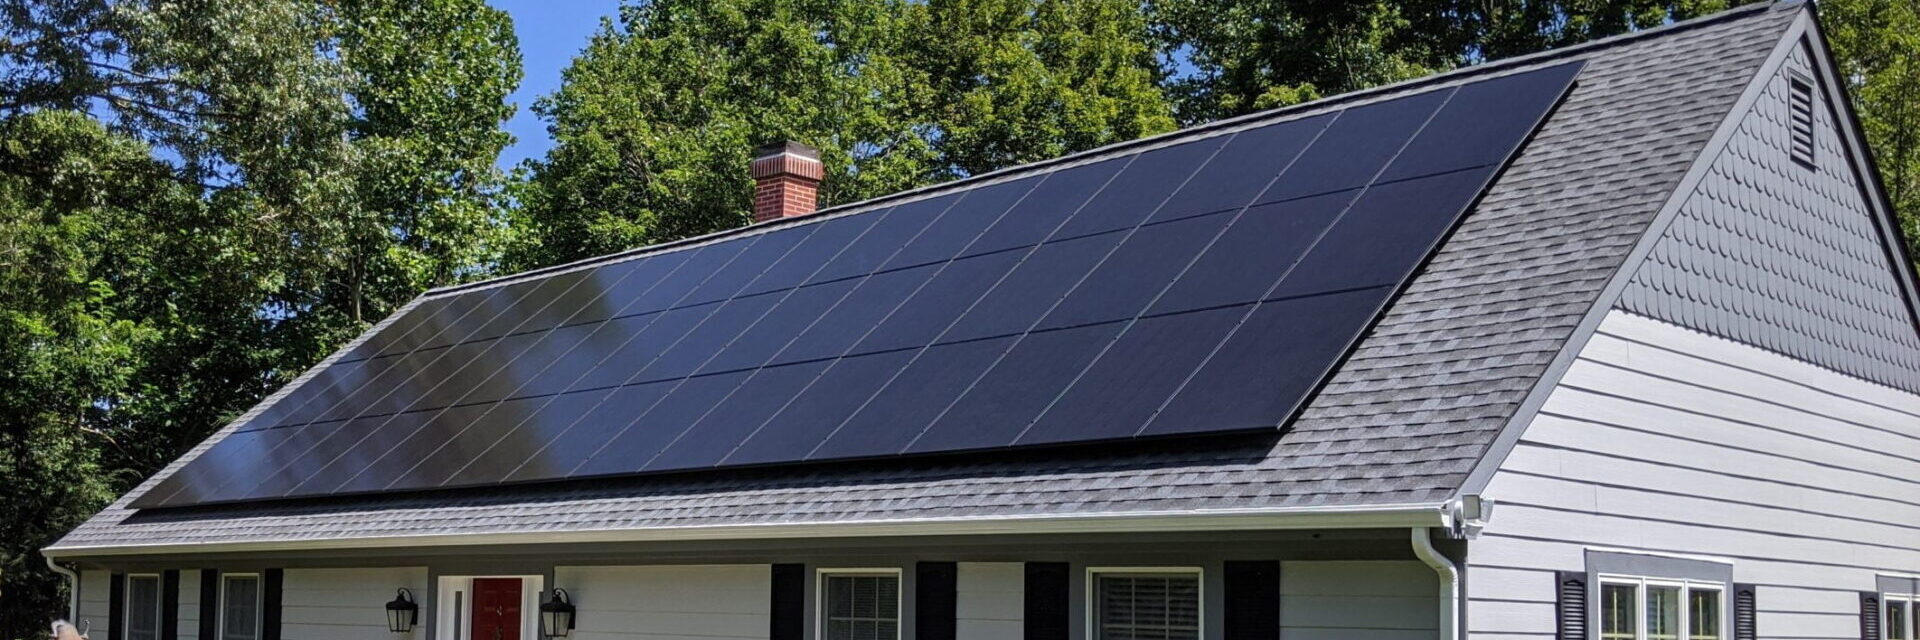 Home rooftop solar panel system installed in Lynchburg Virginia